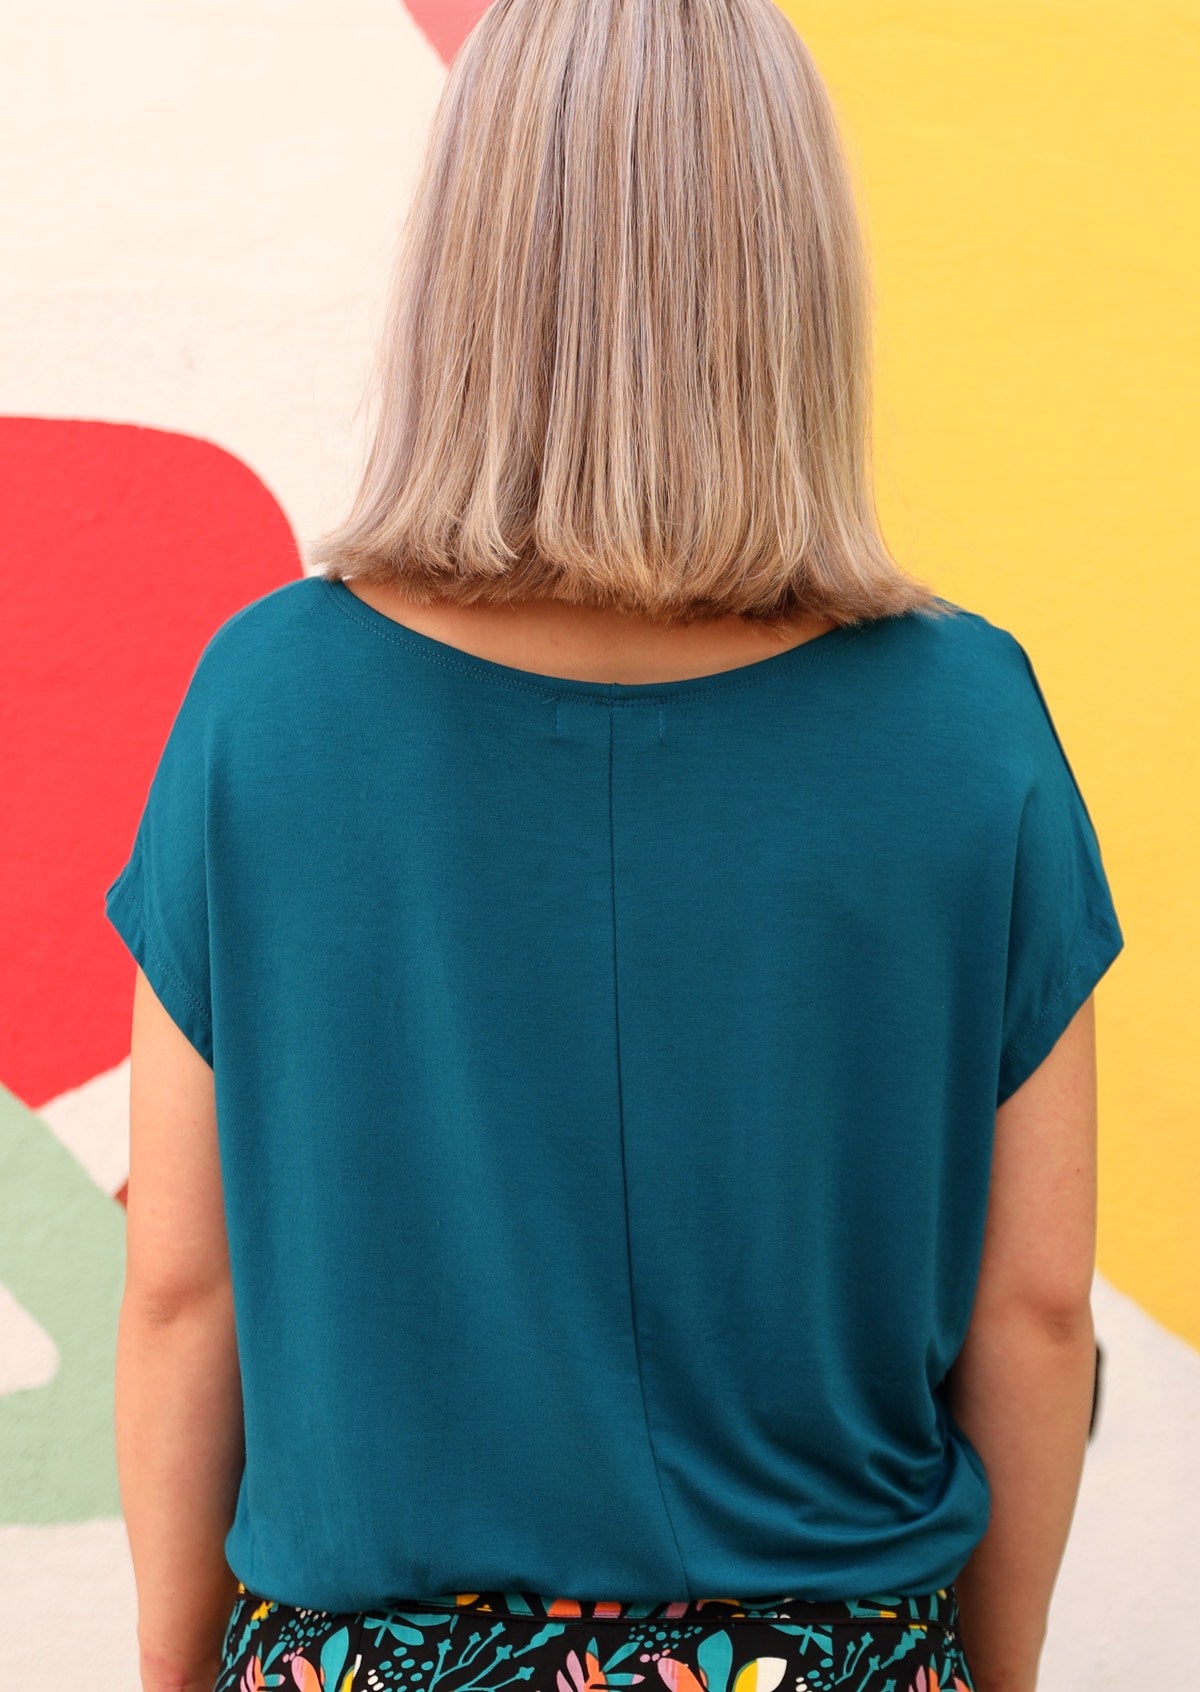 back view seam down back basic teal rayon womens top